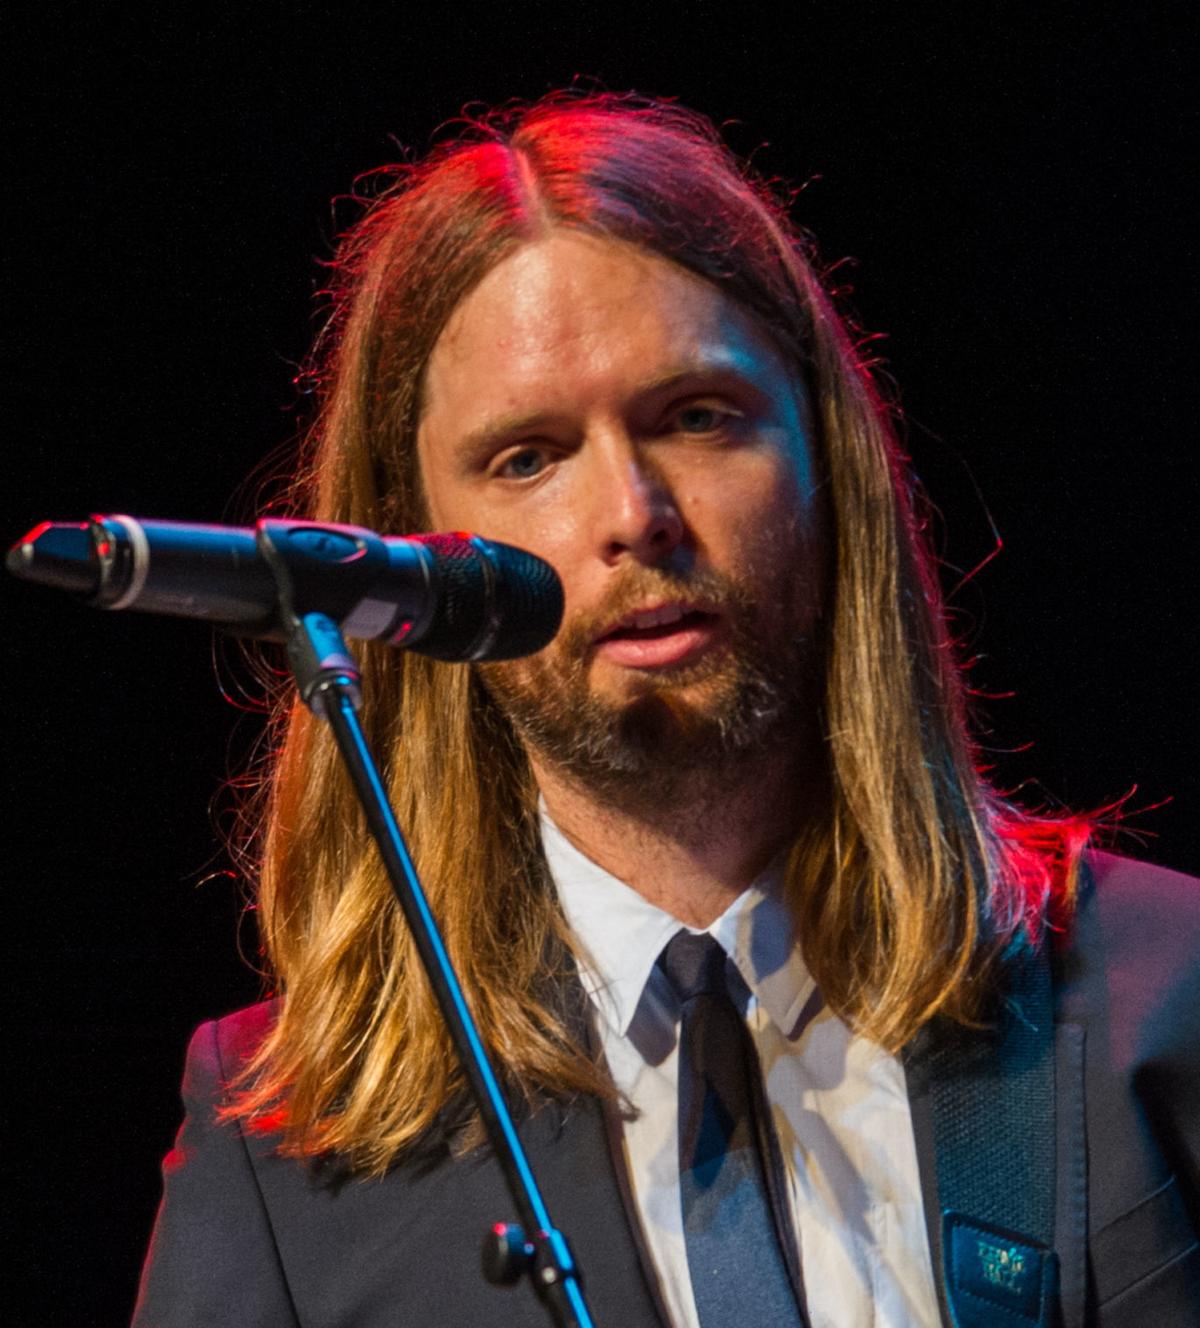 Lincoln native James Valentine to play Super Bowl with Maroon 5 | Music ...